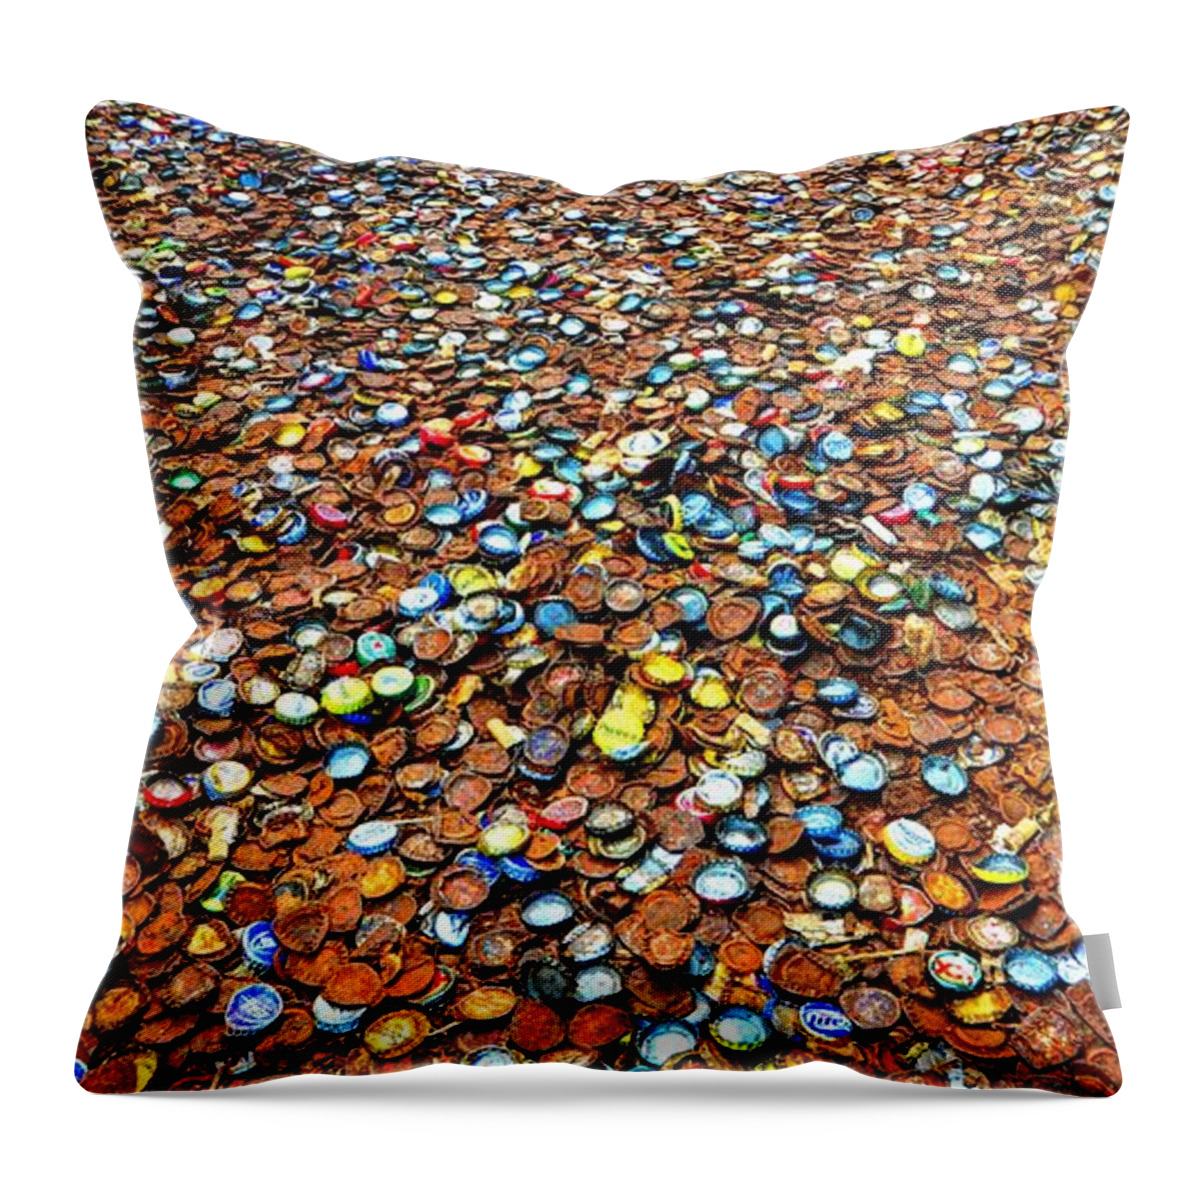 Bottlecap Alley Throw Pillow featuring the photograph Bottlecap Alley by David Morefield